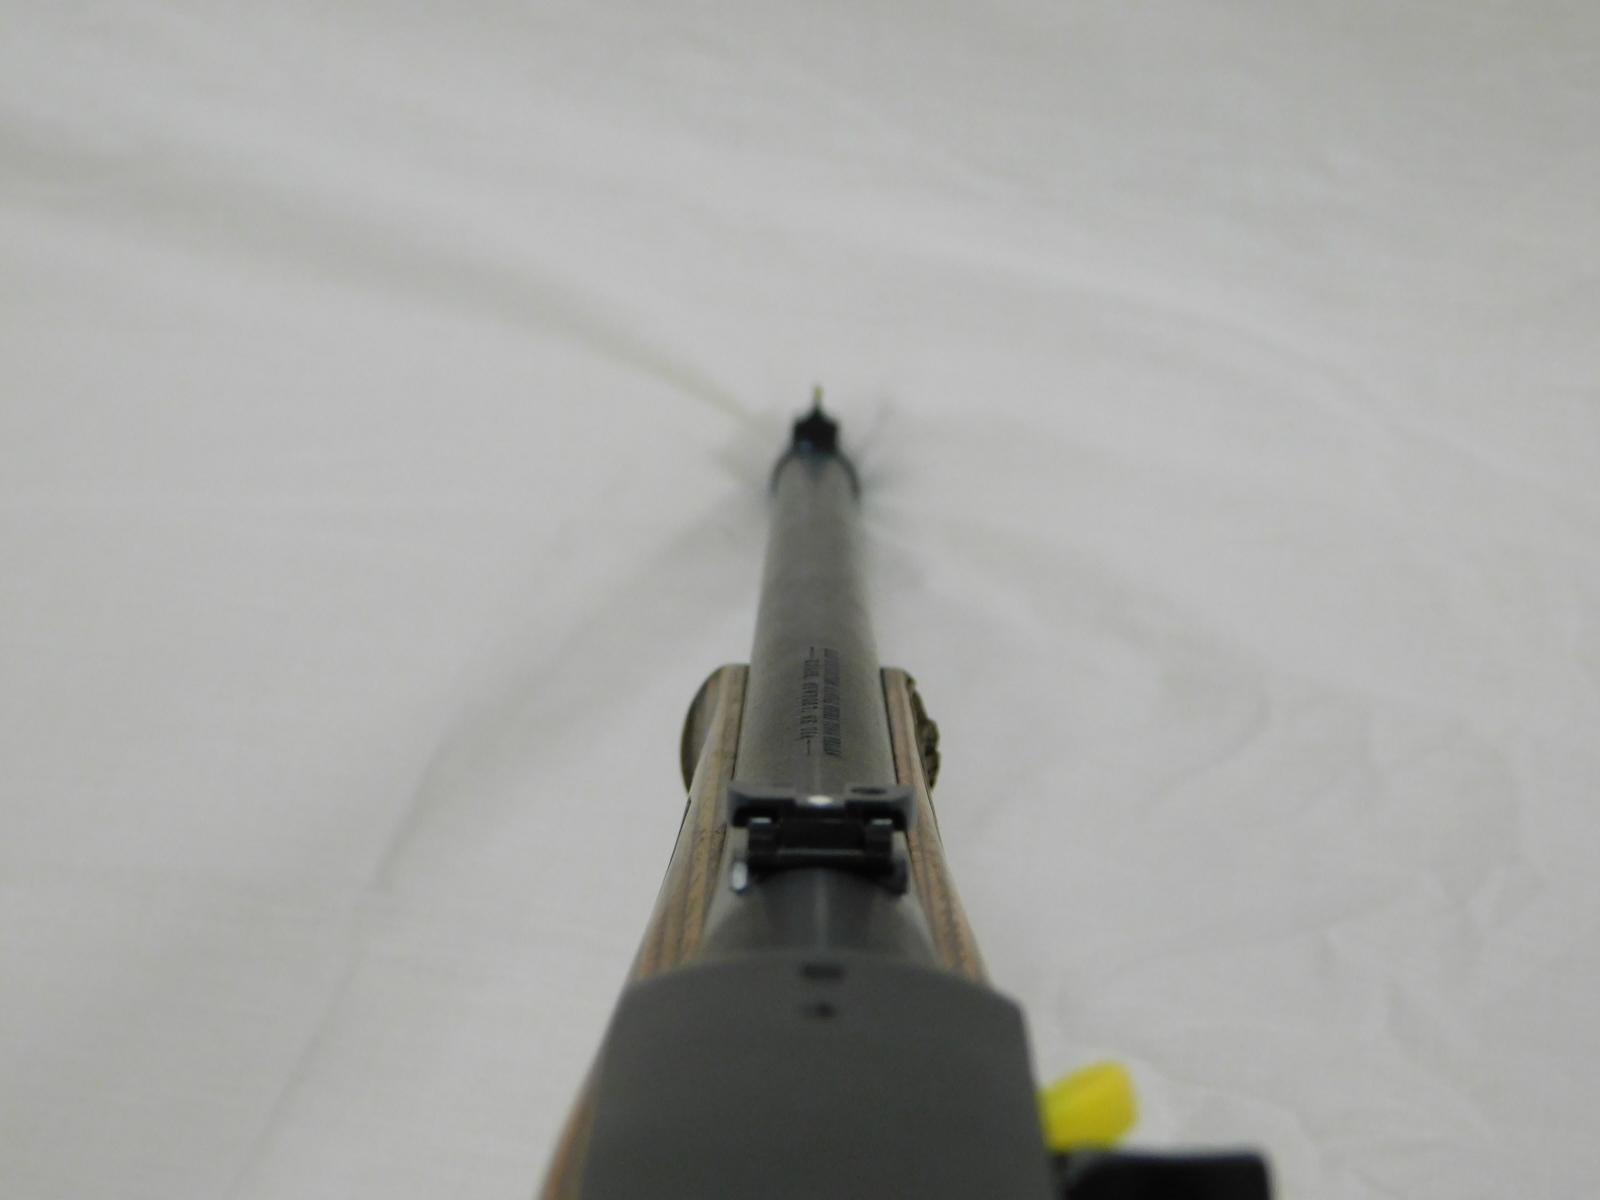 RUGER 10/22 "THE AMERICAN FARMER EDITION" .22LR CAL RIFLE